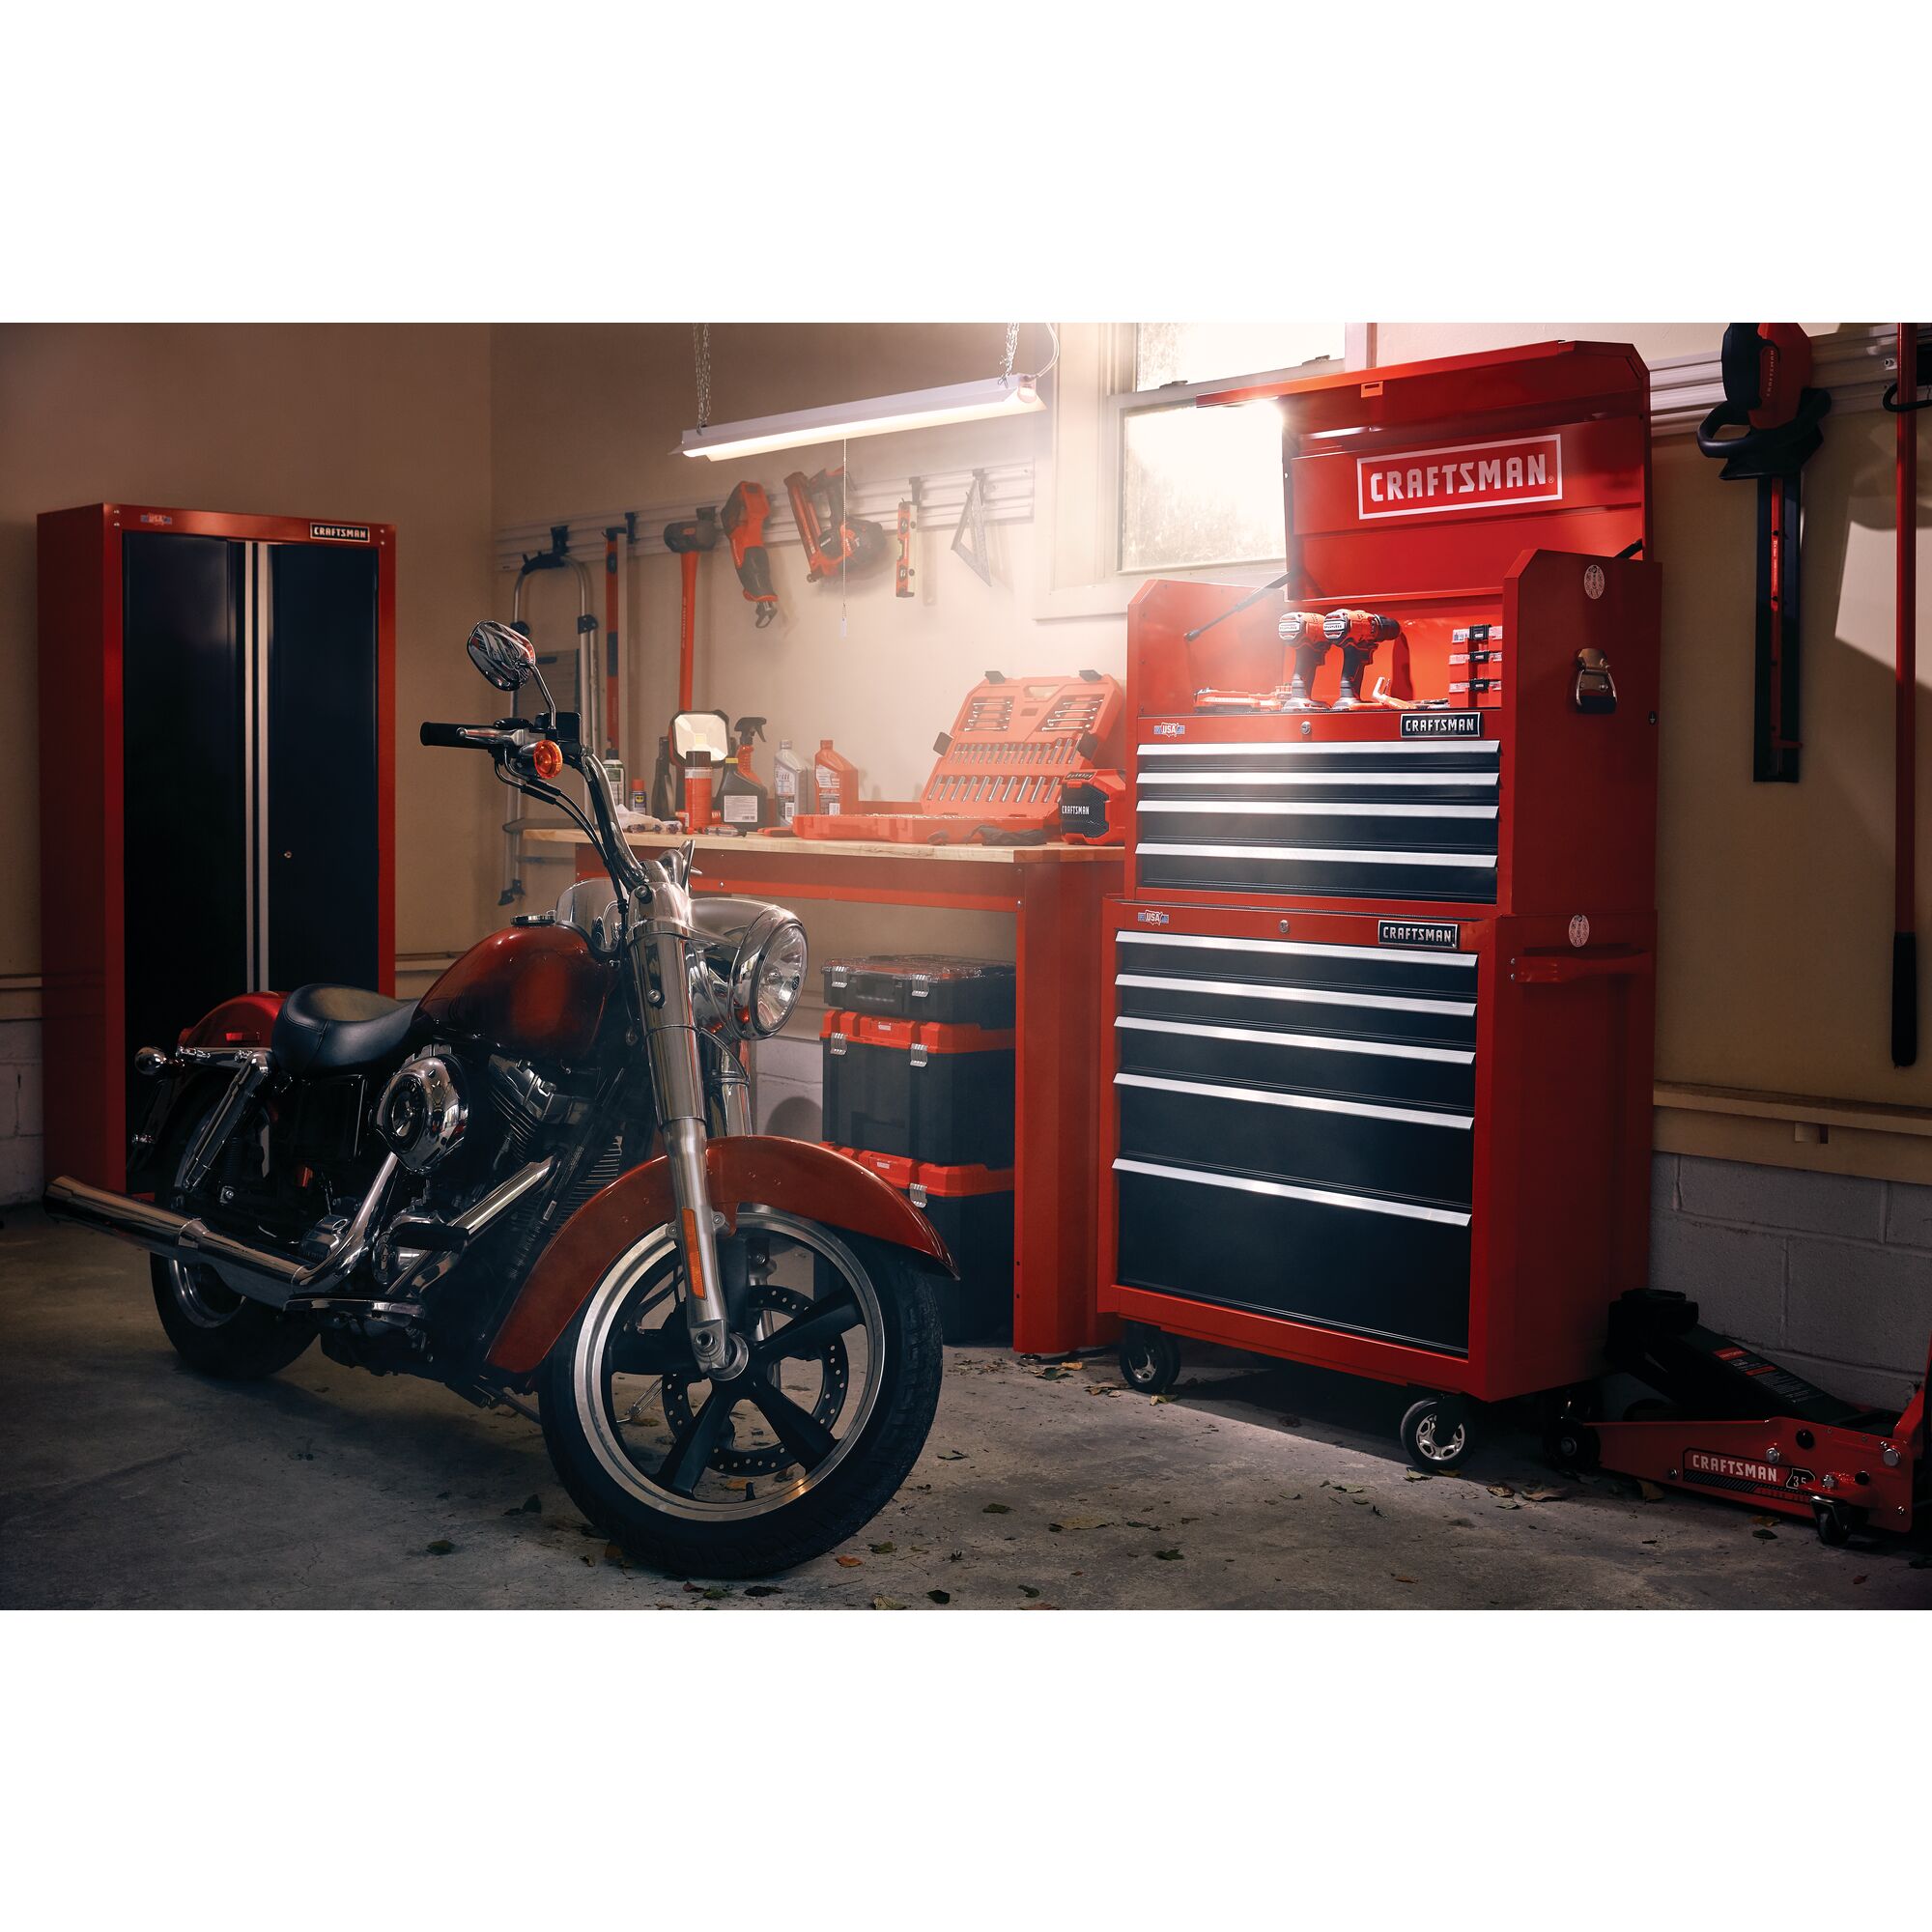 2000 Series 26 inch 5 Drawer Tool Chest with open lid stacked on top of compatible tool cabinet placed in a garage workshop along with other tool storage cabinets equipments and a motorbike.